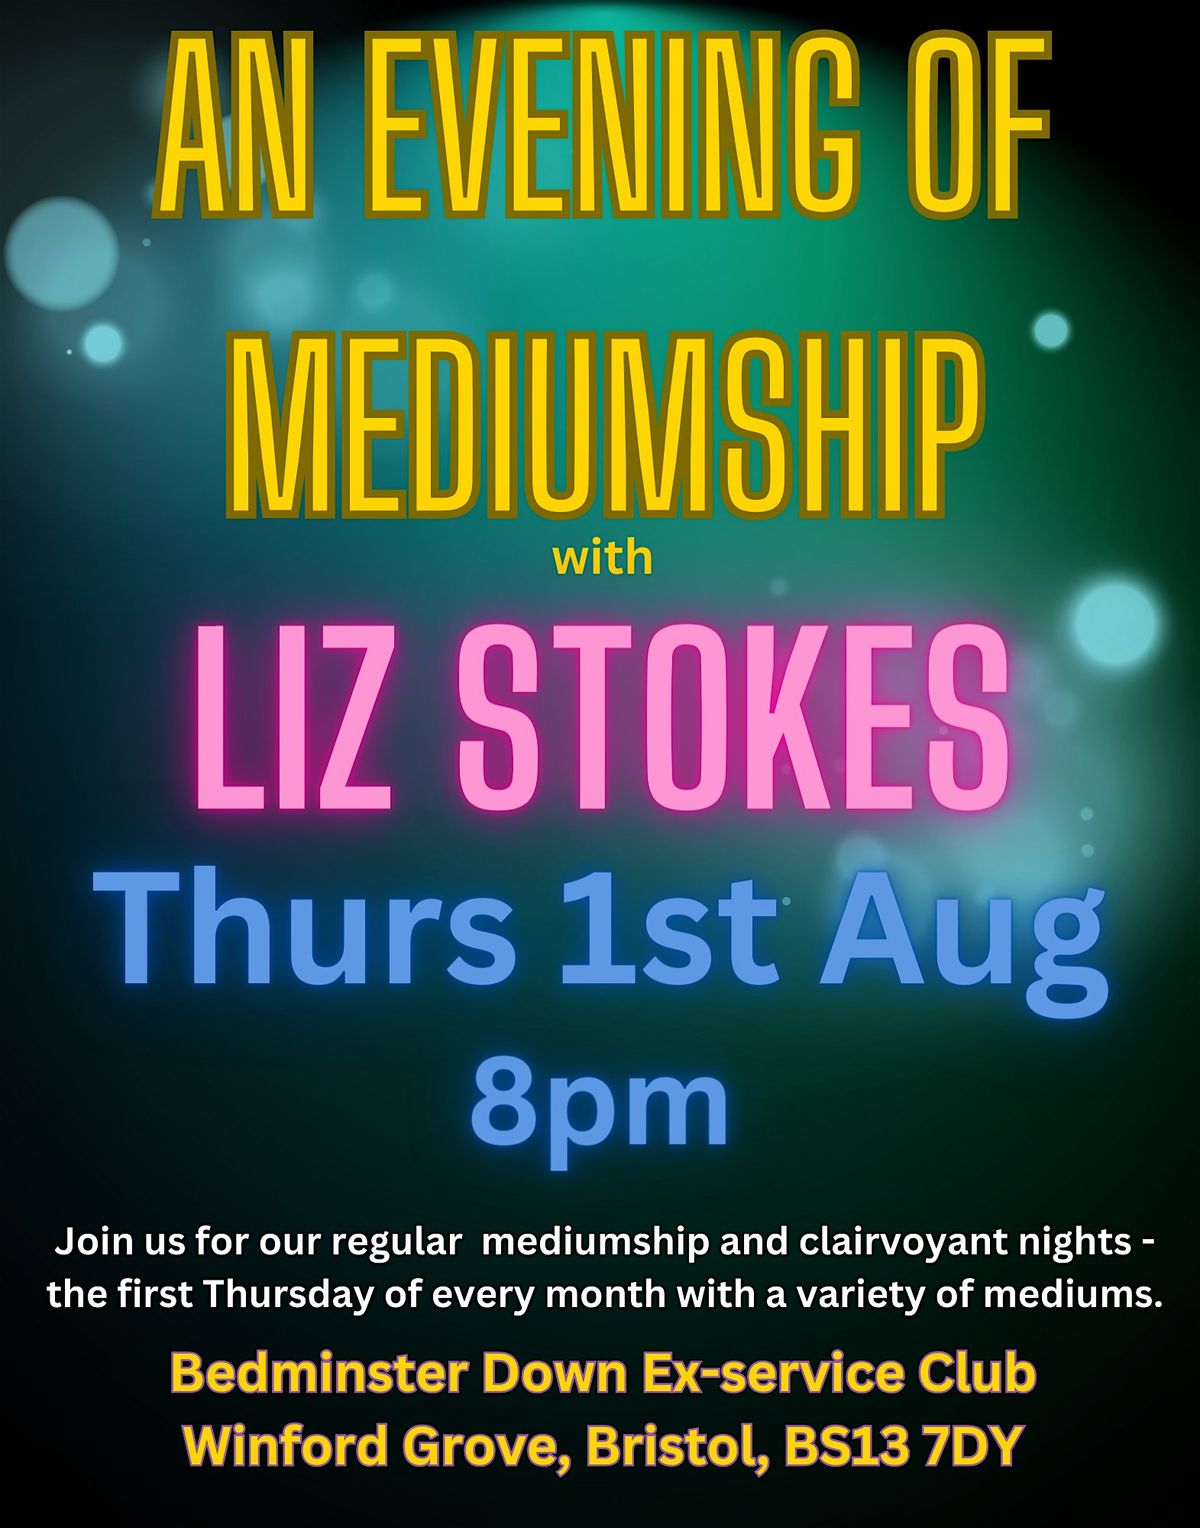 Evening of Clairvoyance & Mediumship - FIRST THURSDAY OF THE MONTH